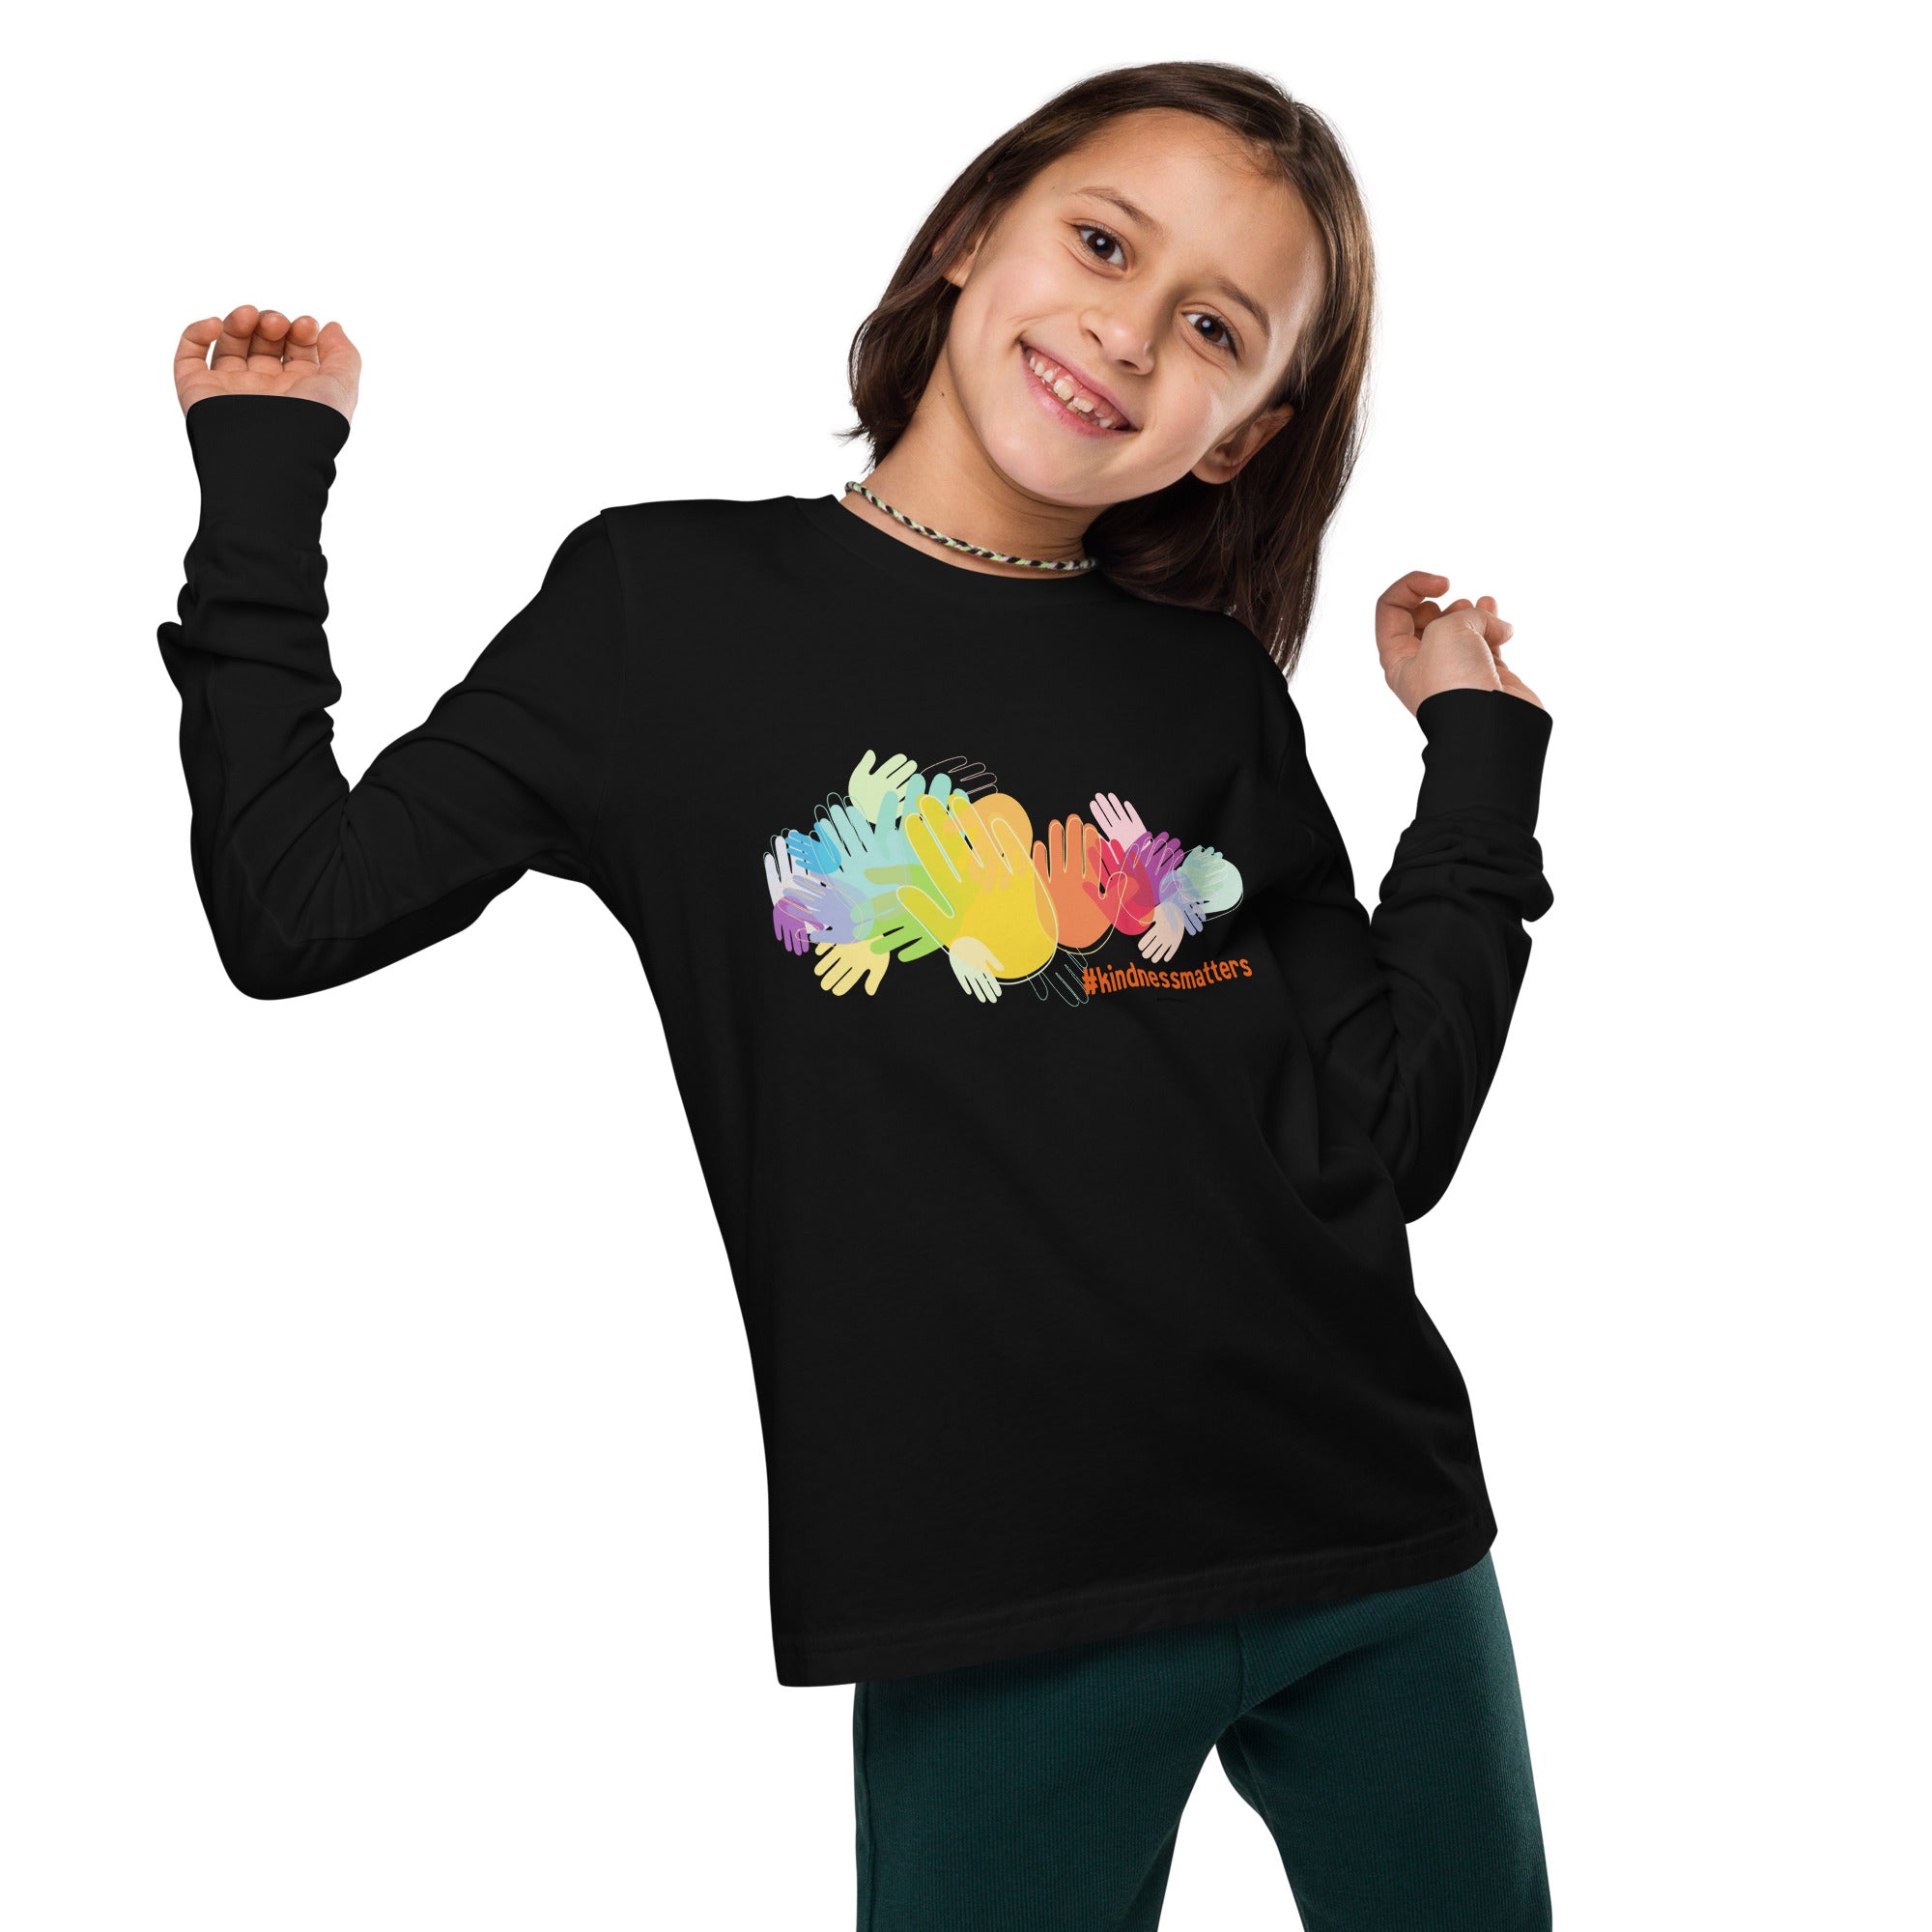 Kindness matters - Youth long sleeve tee